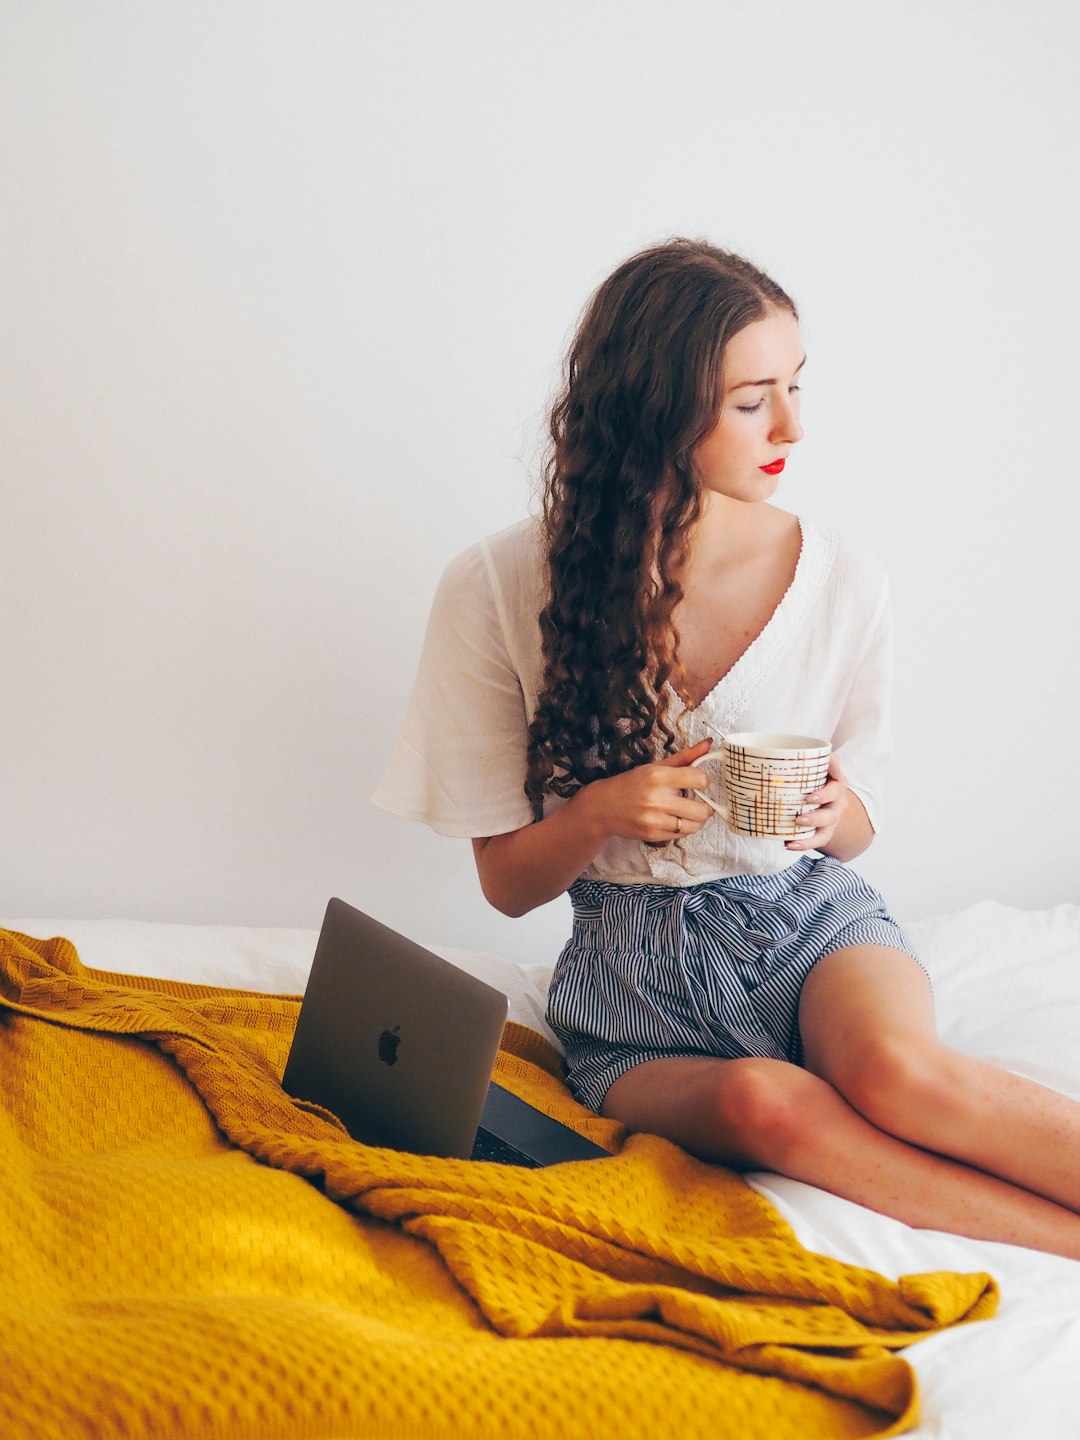 woman in white long sleeve shirt and blue denim shorts sitting on bed using silver macbook